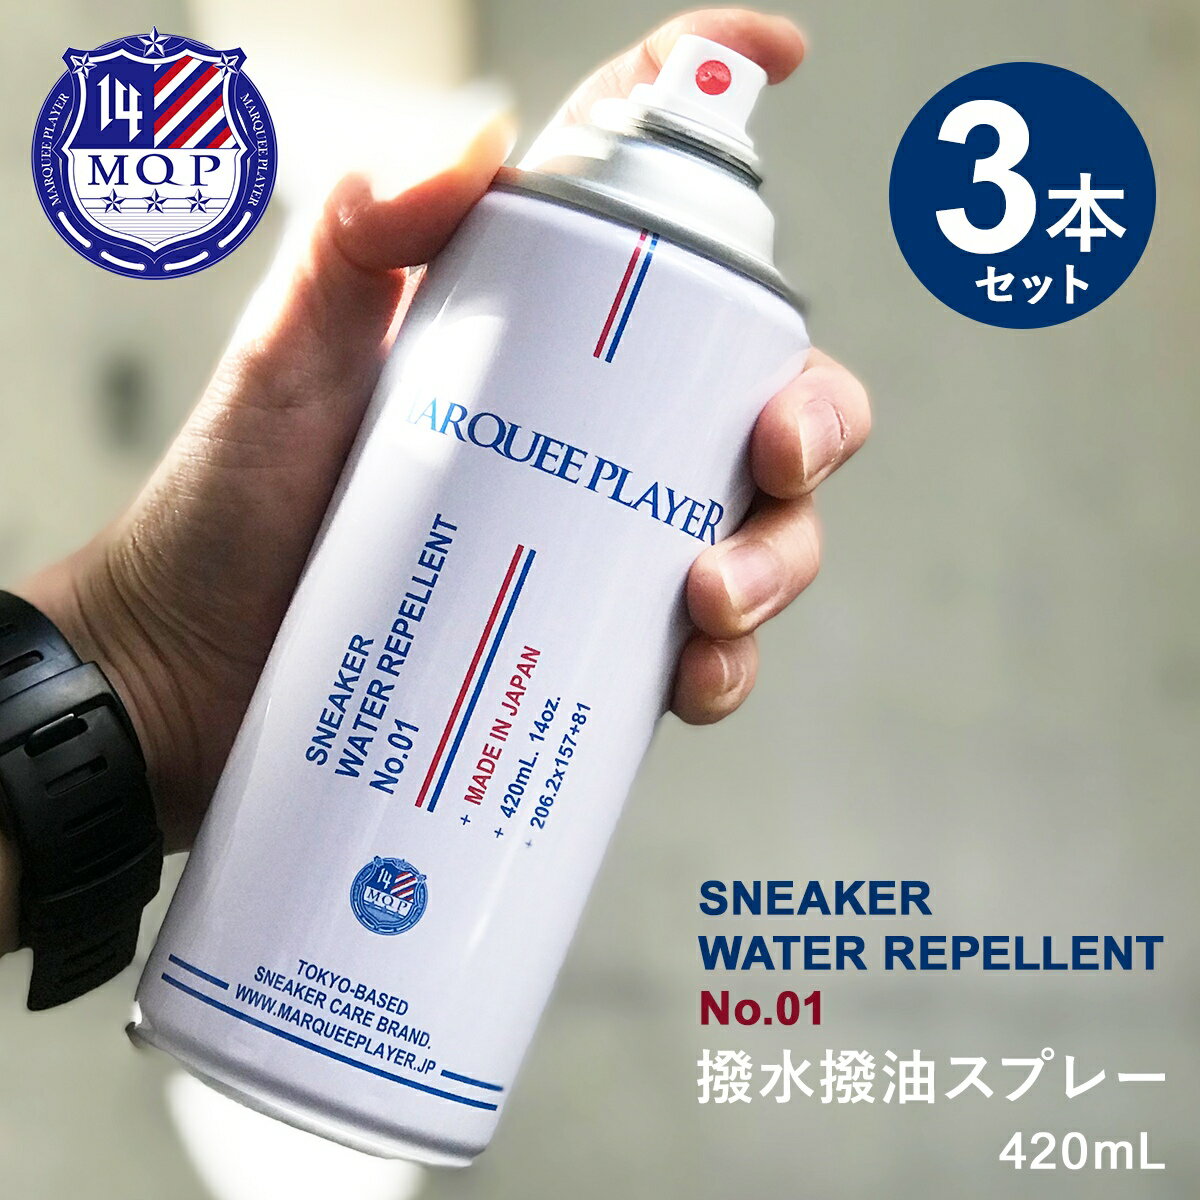 MARQUEE PLAYER SNEAKER WATER REPELLENT KEEPER No.01 マーキープレイヤー 防水スプレー 撥水 3本セット シューケア シューズケア ケア用品 スニーカー ケア 撥油 MP005 【海外発送不可】